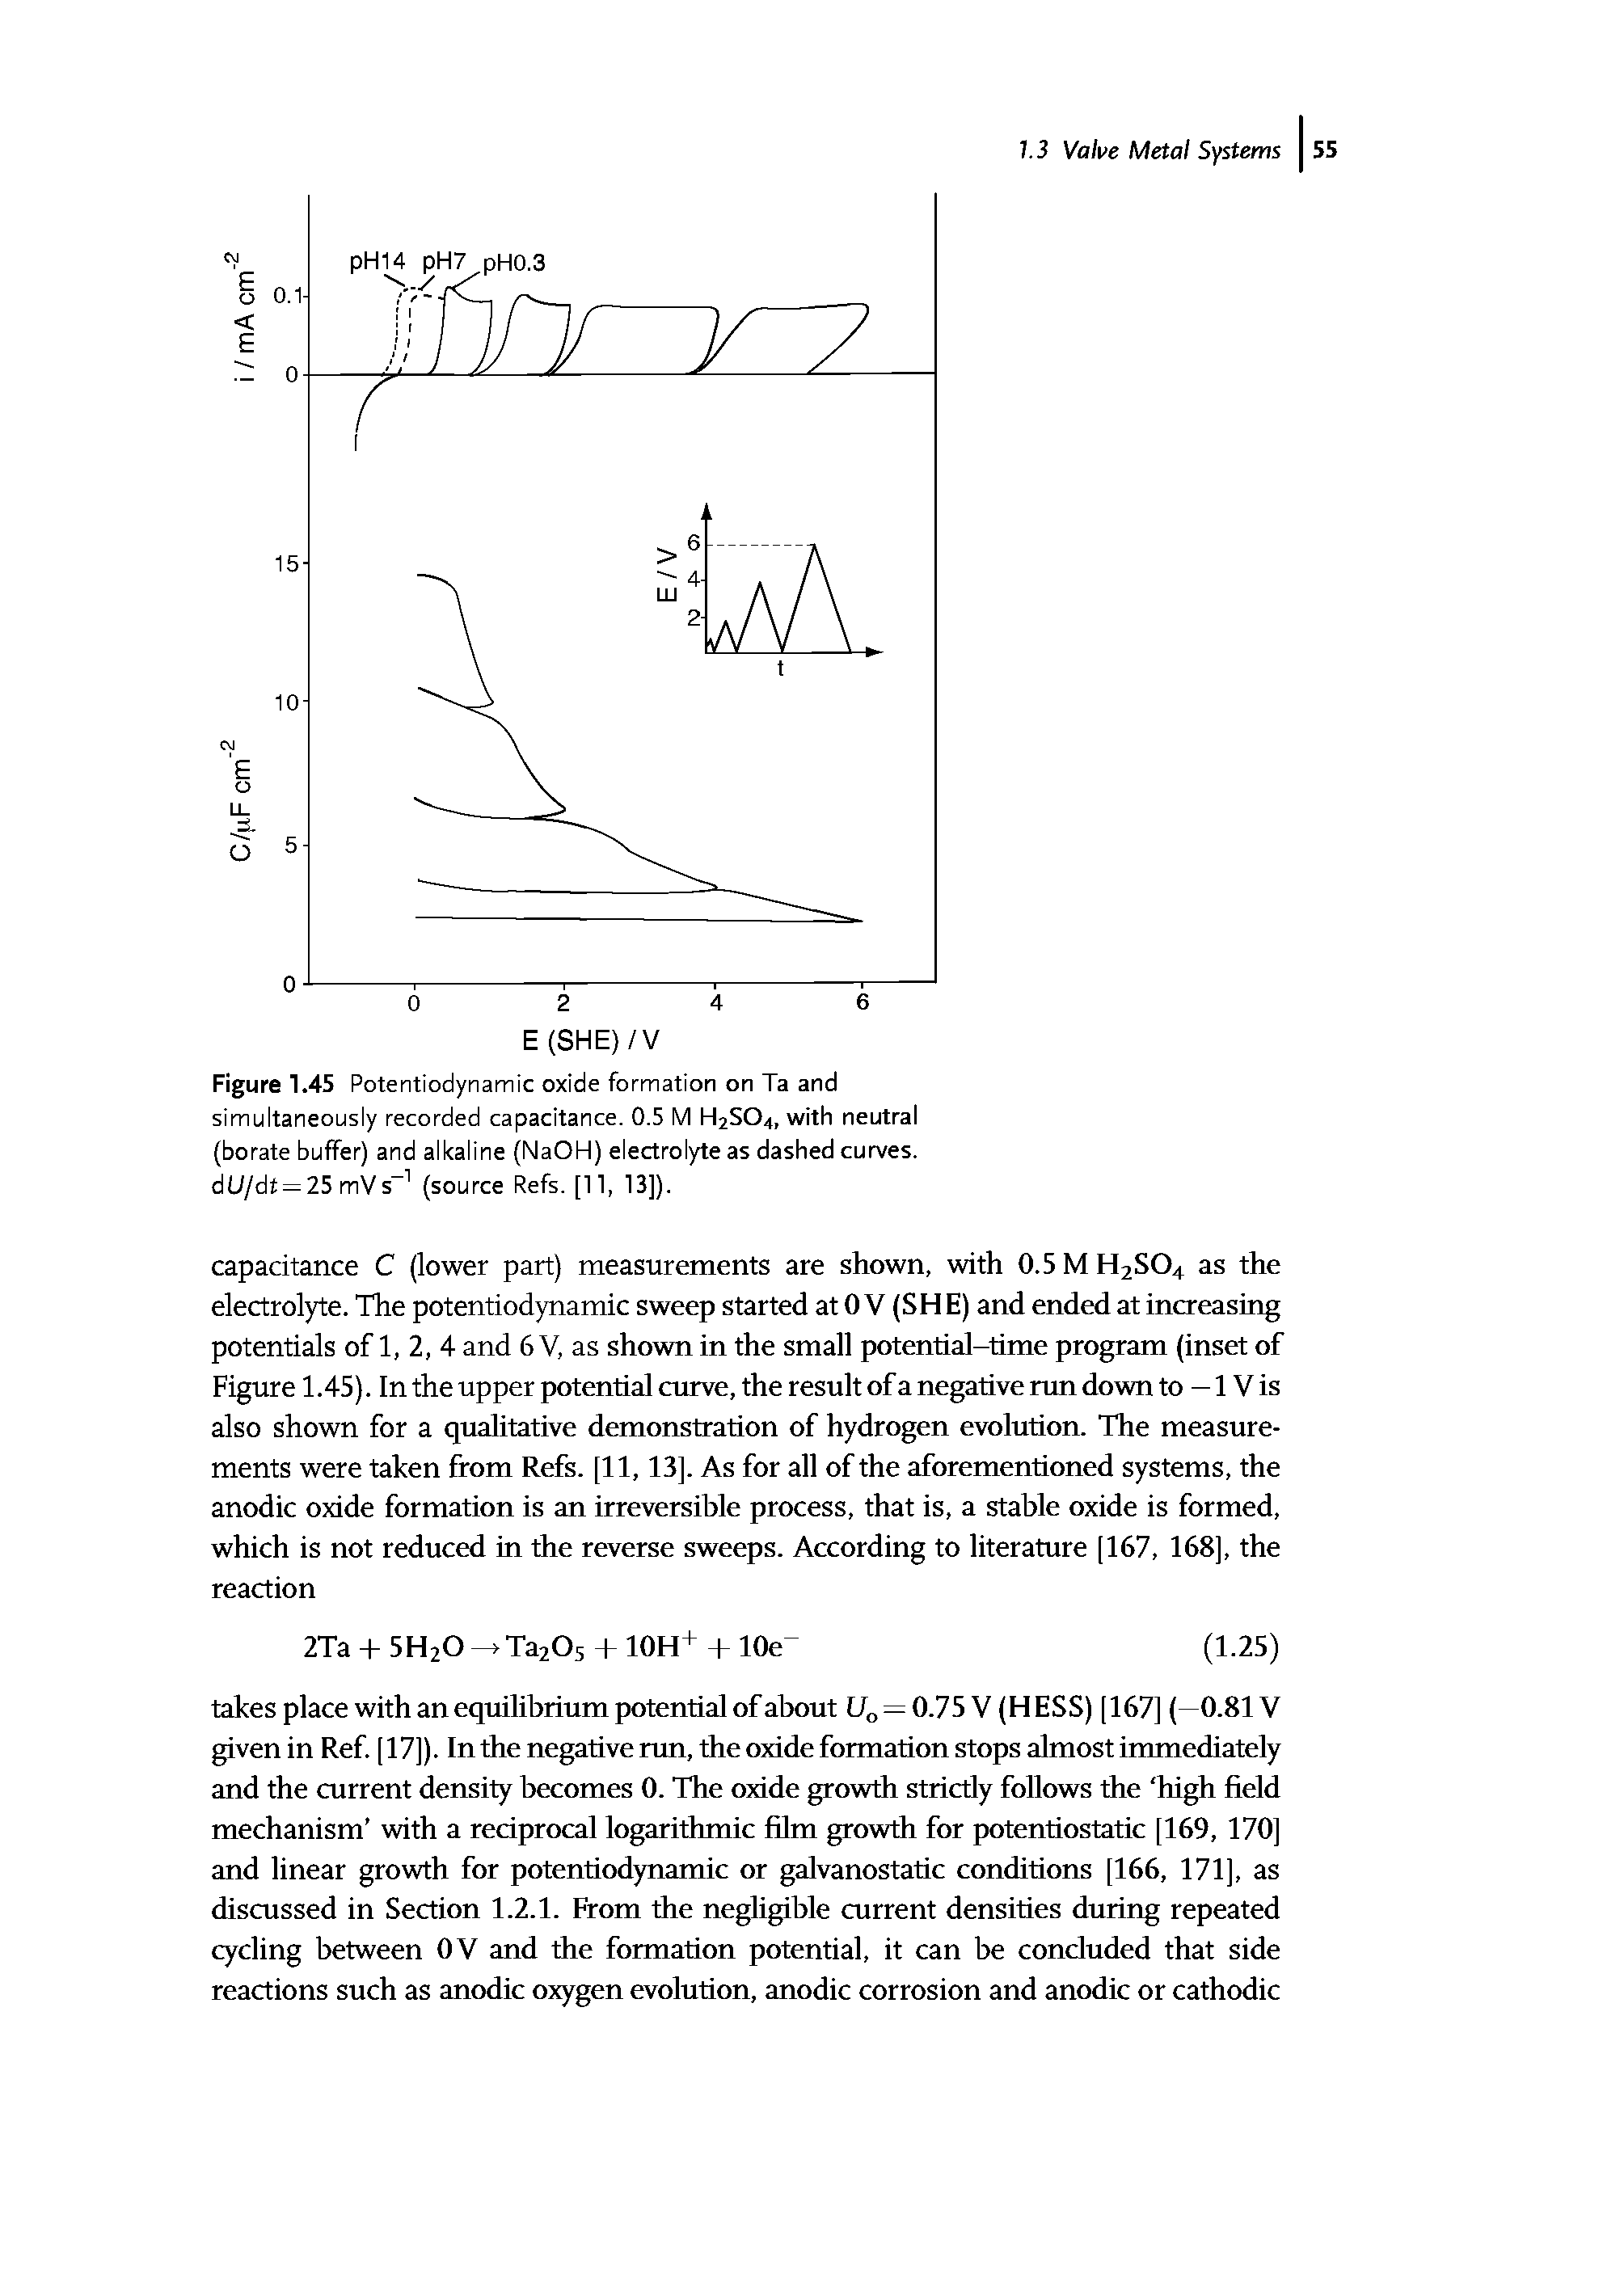 Figure 1.45 Potentiodynamic oxide formation on Ta and simultaneously recorded capacitance. 0.5 M H2S04, with neutral (borate buffer) and alkaline (NaOH) electrolyte as dashed curves. dU/dt = 25 mVs-1 (source Refs. [11, 13]).